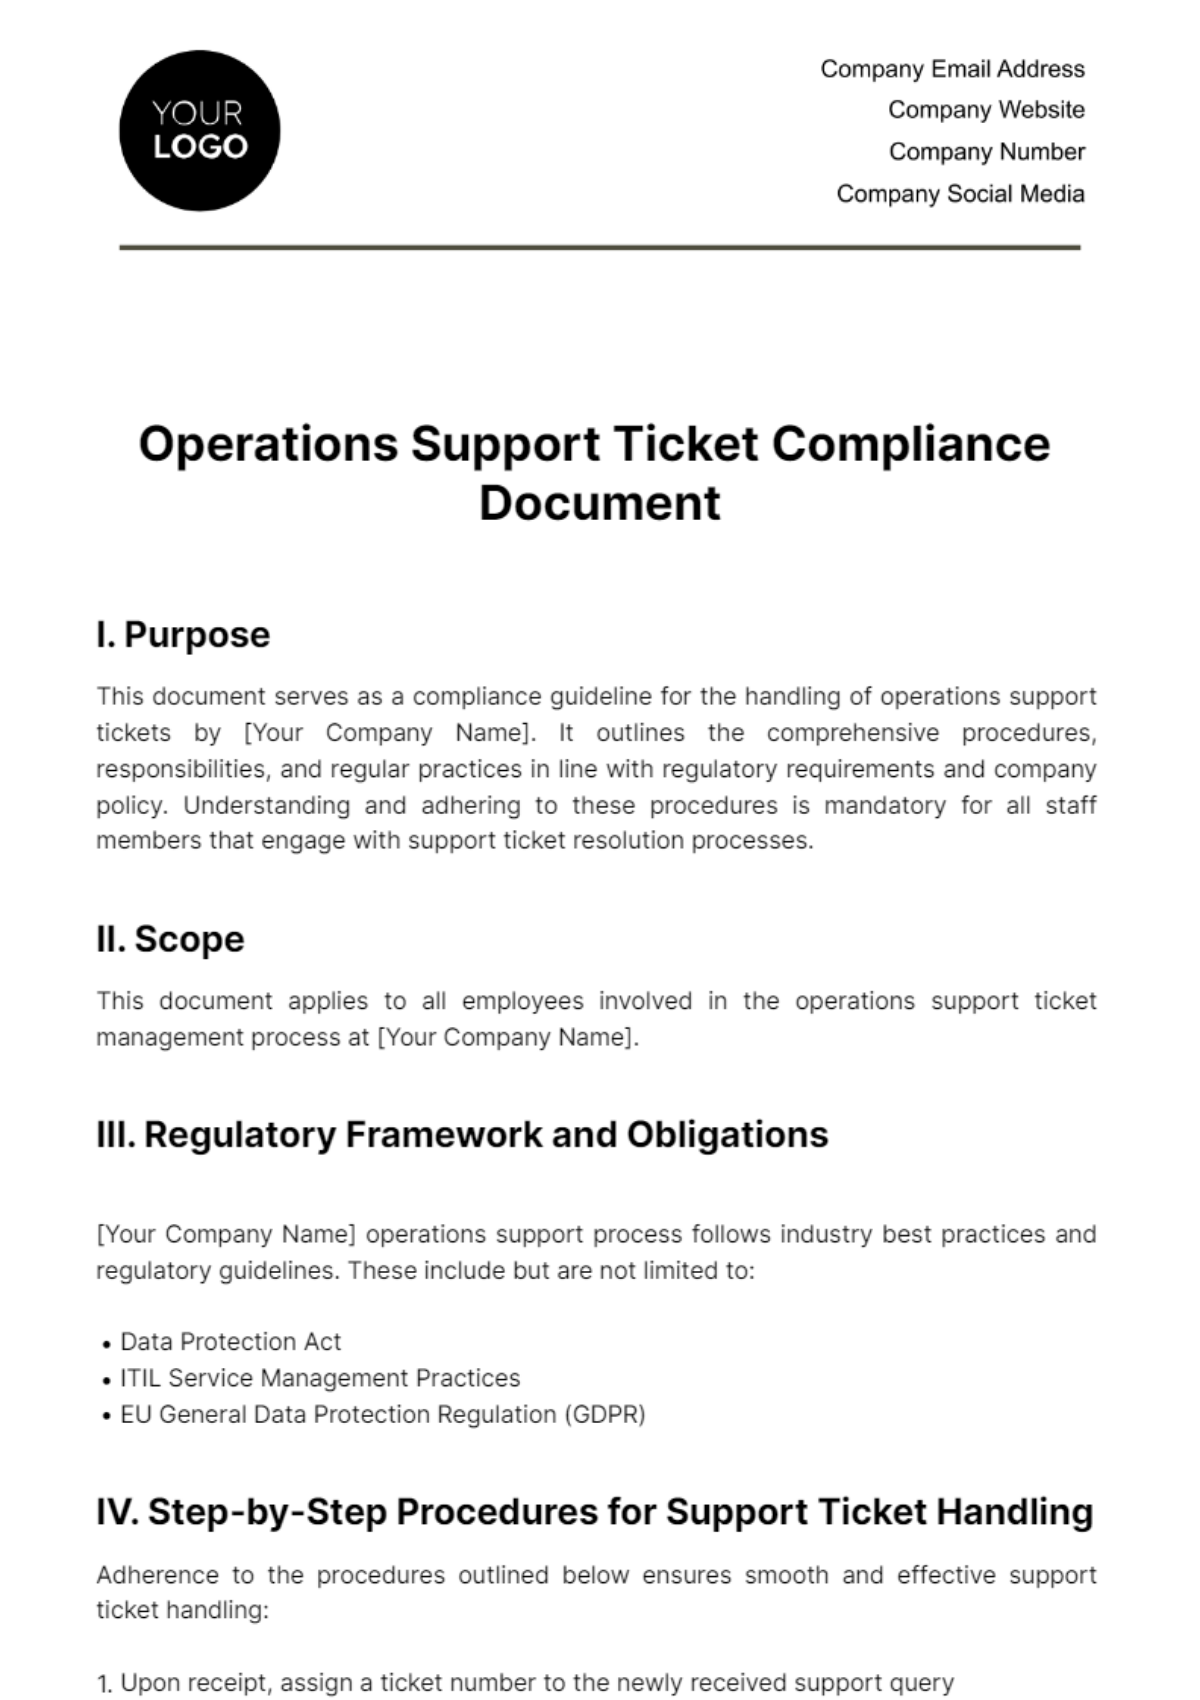 Operations Support Ticket Compliance Document Template